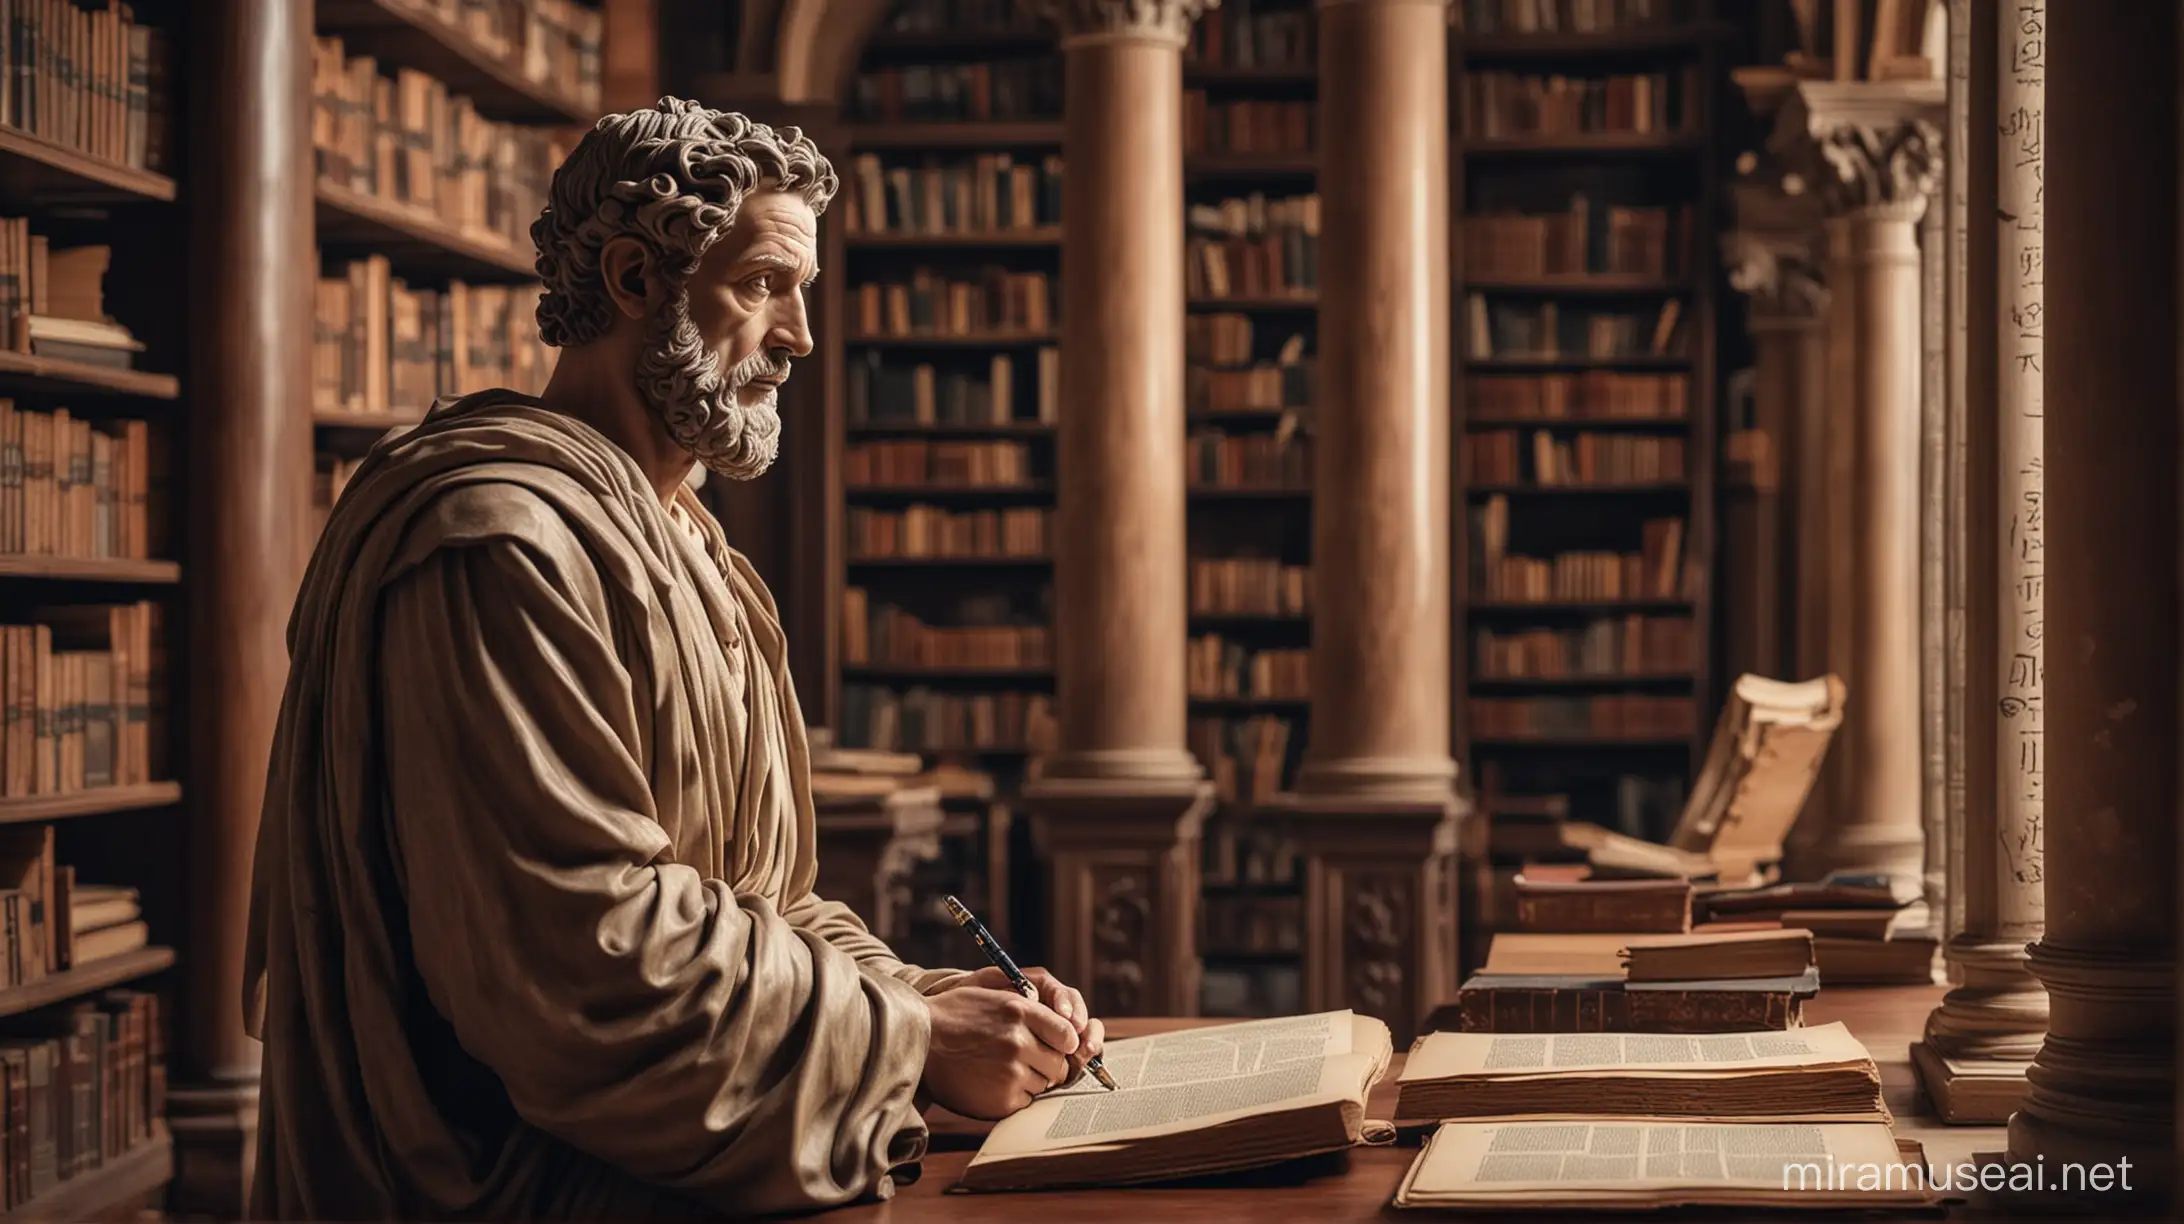 Ancient Stoic Philosopher in Grand Library Contemplating Stoic Principles